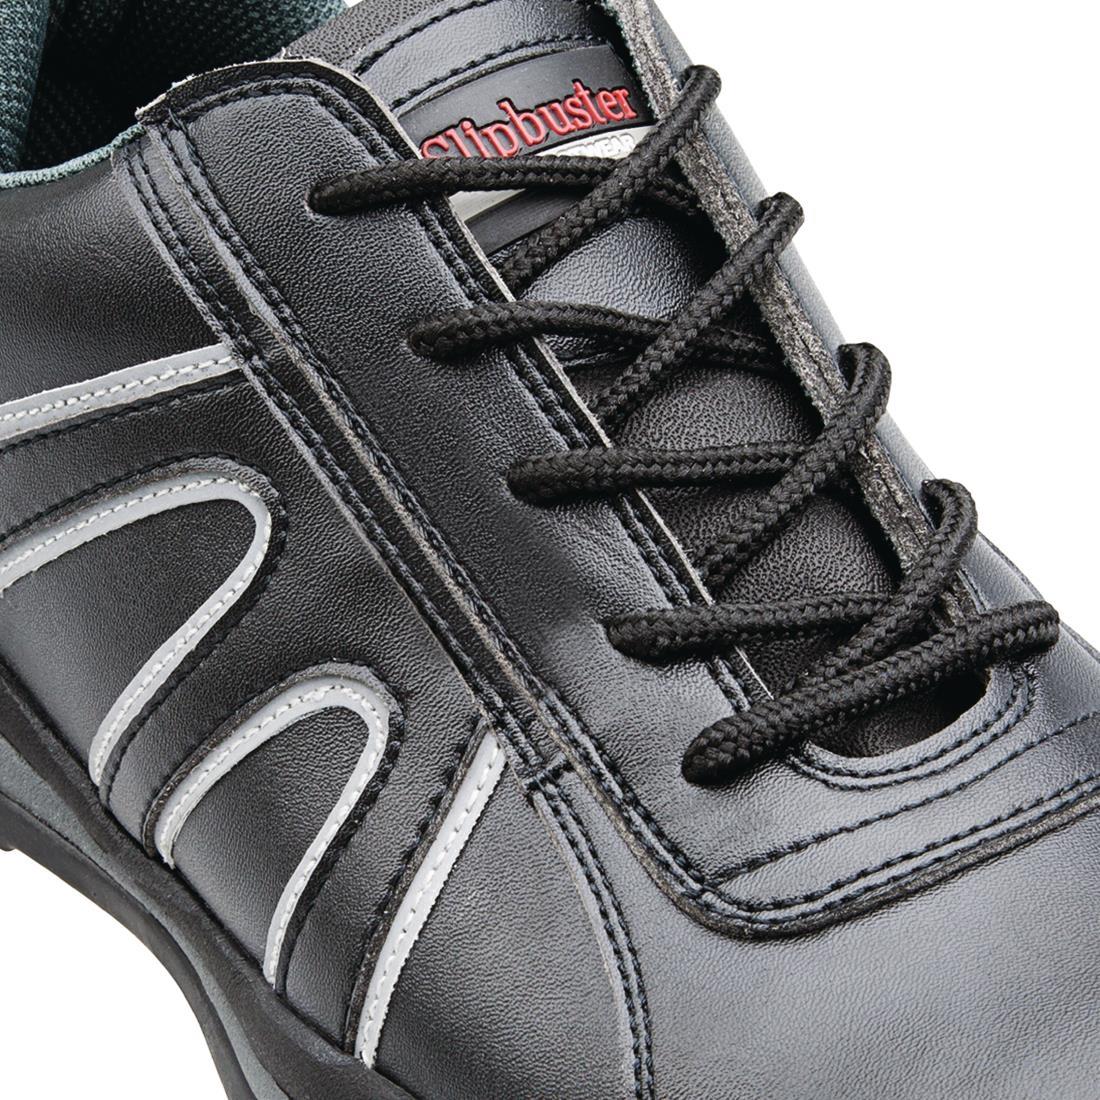 Slipbuster Safety Trainers Black 46 - A708-46  - 3